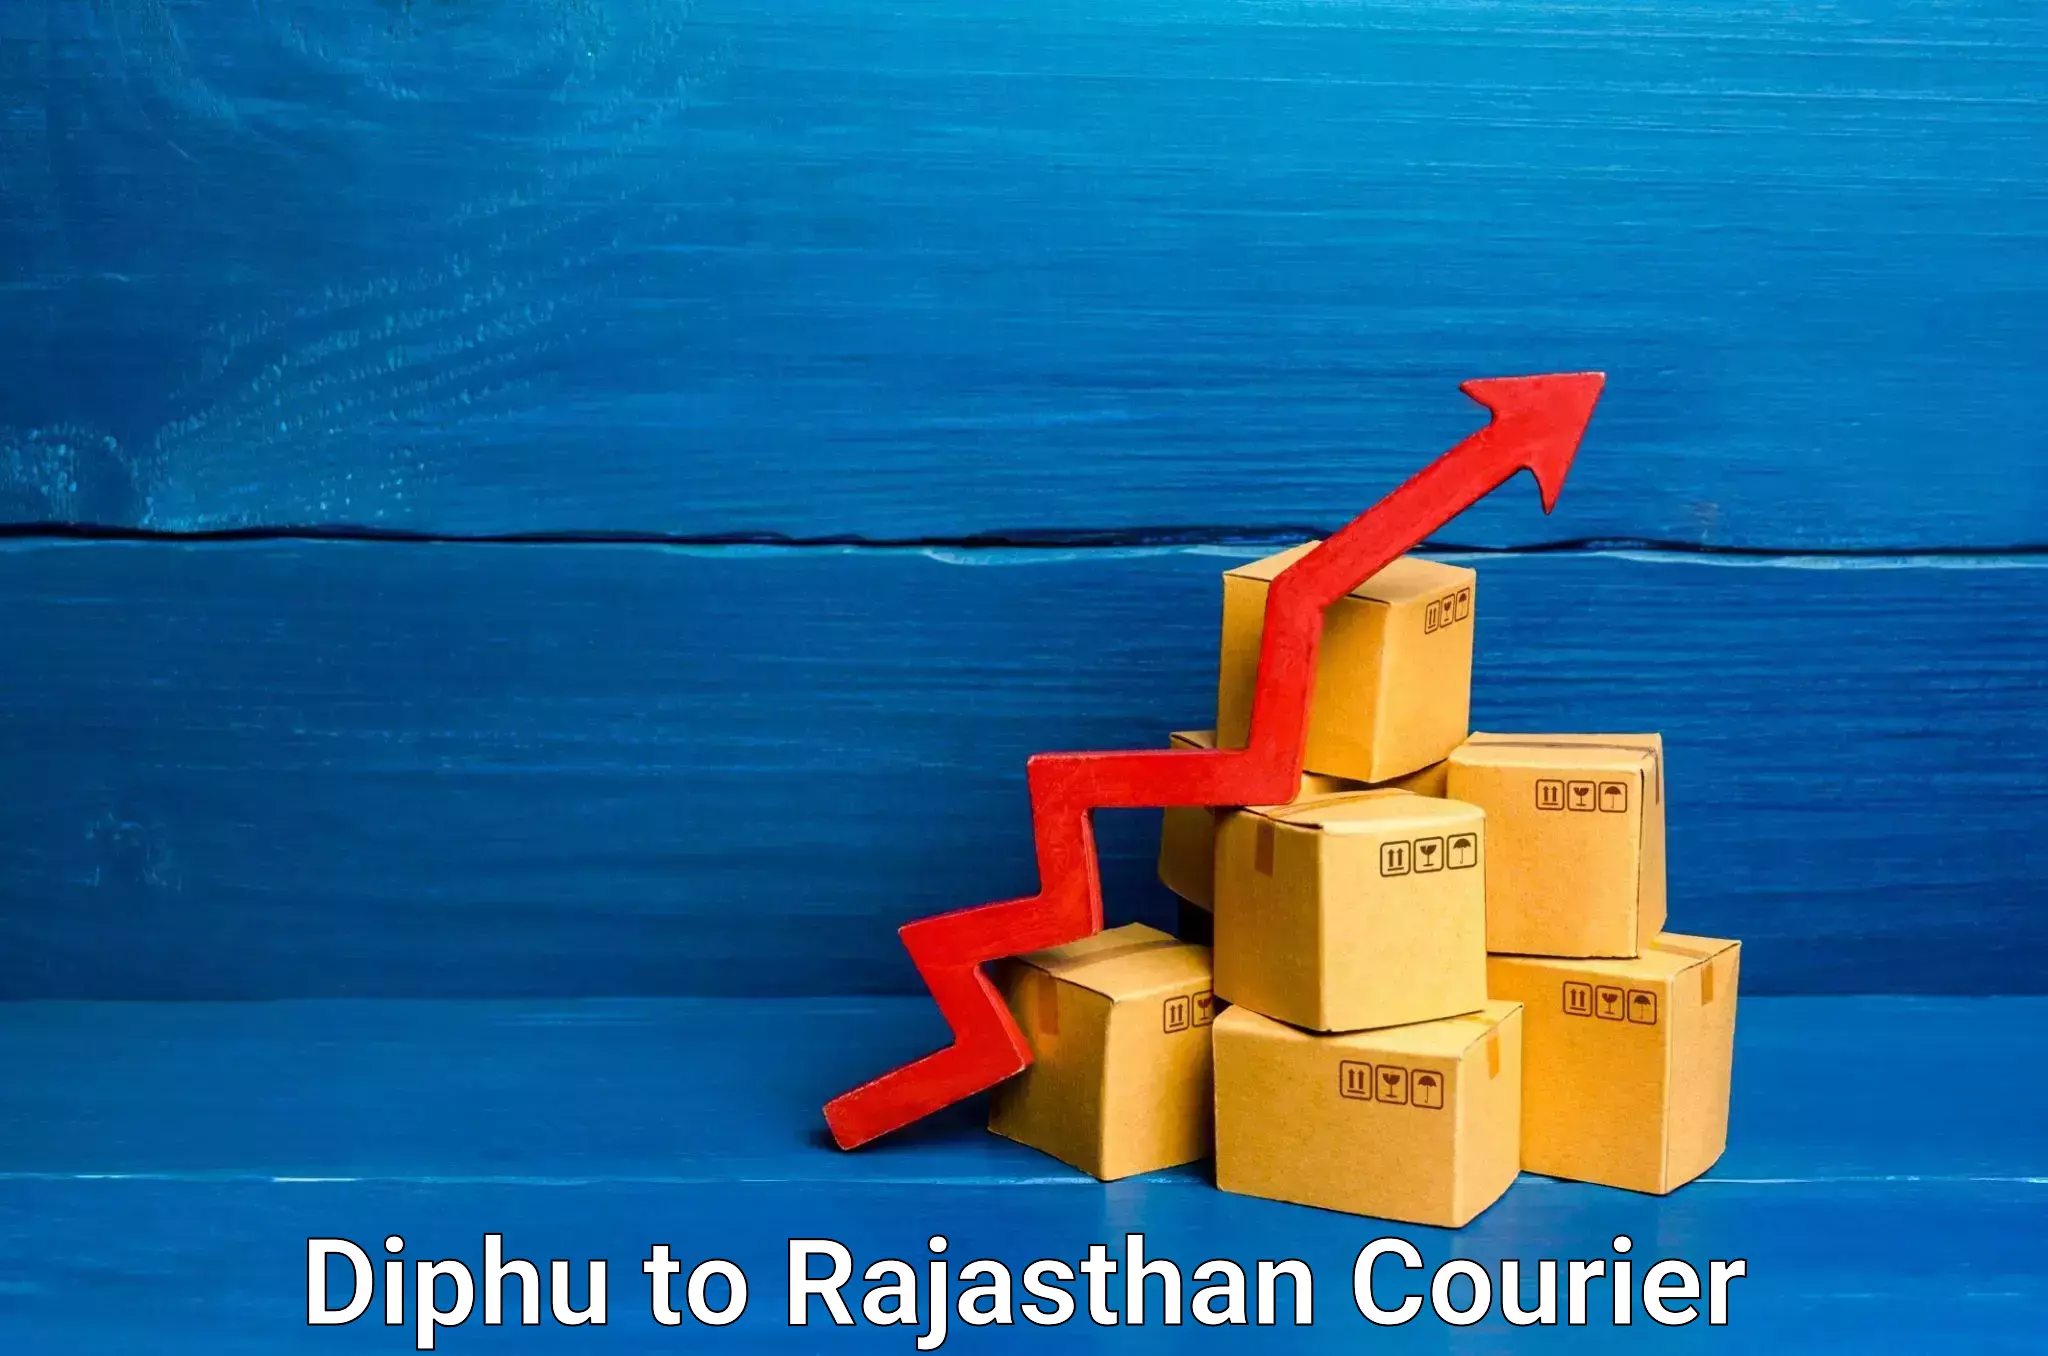 Package delivery network Diphu to Rajasthan